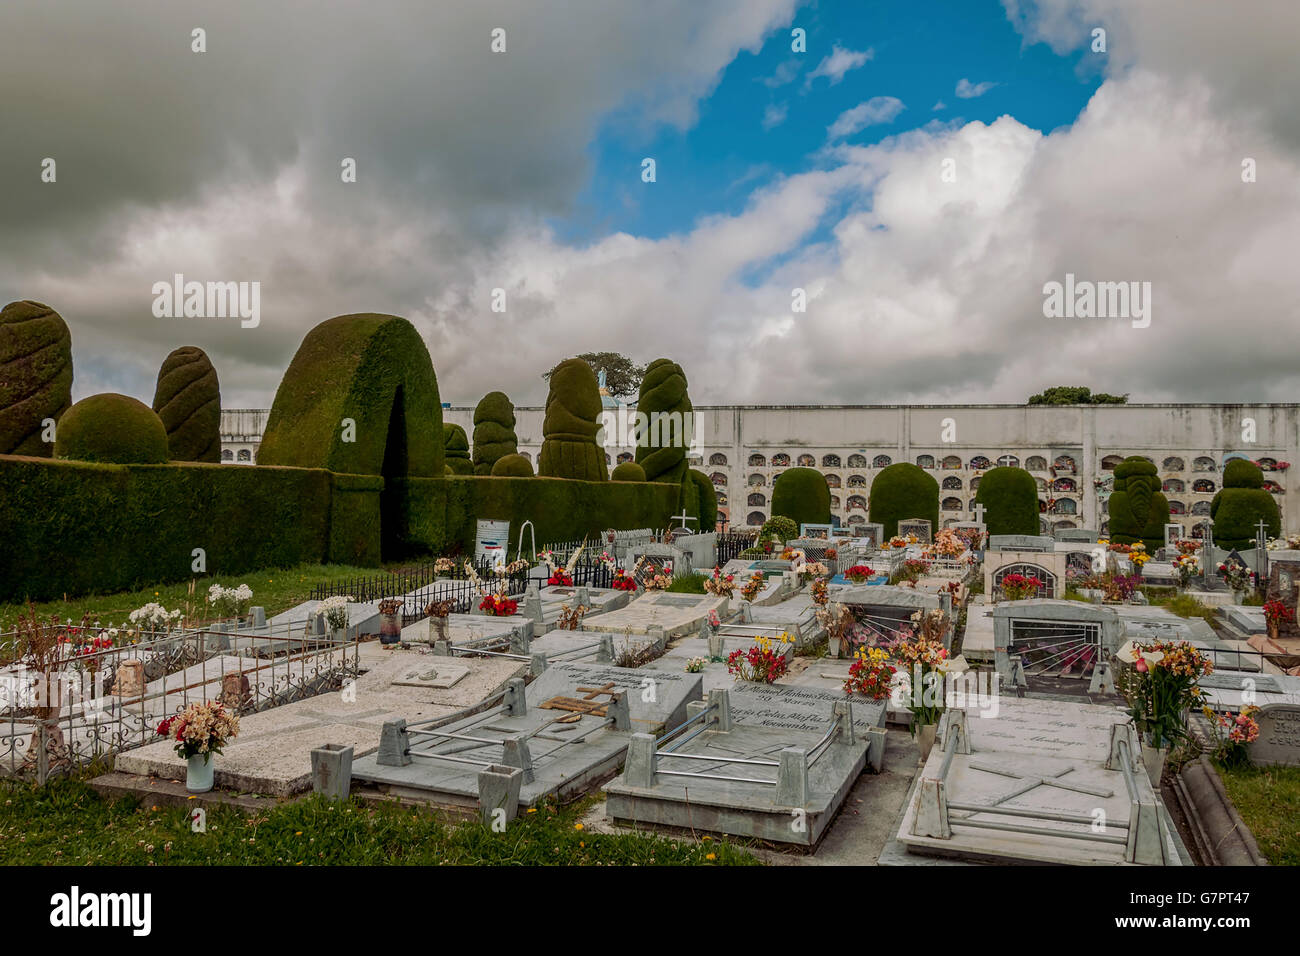 Tulcan, Ecuador  - 10 julio 2011: The Cemetery Of Tulcan Was Founded In 1932 To Replace The Old Cemetery, Ecuador, South America Stock Photo